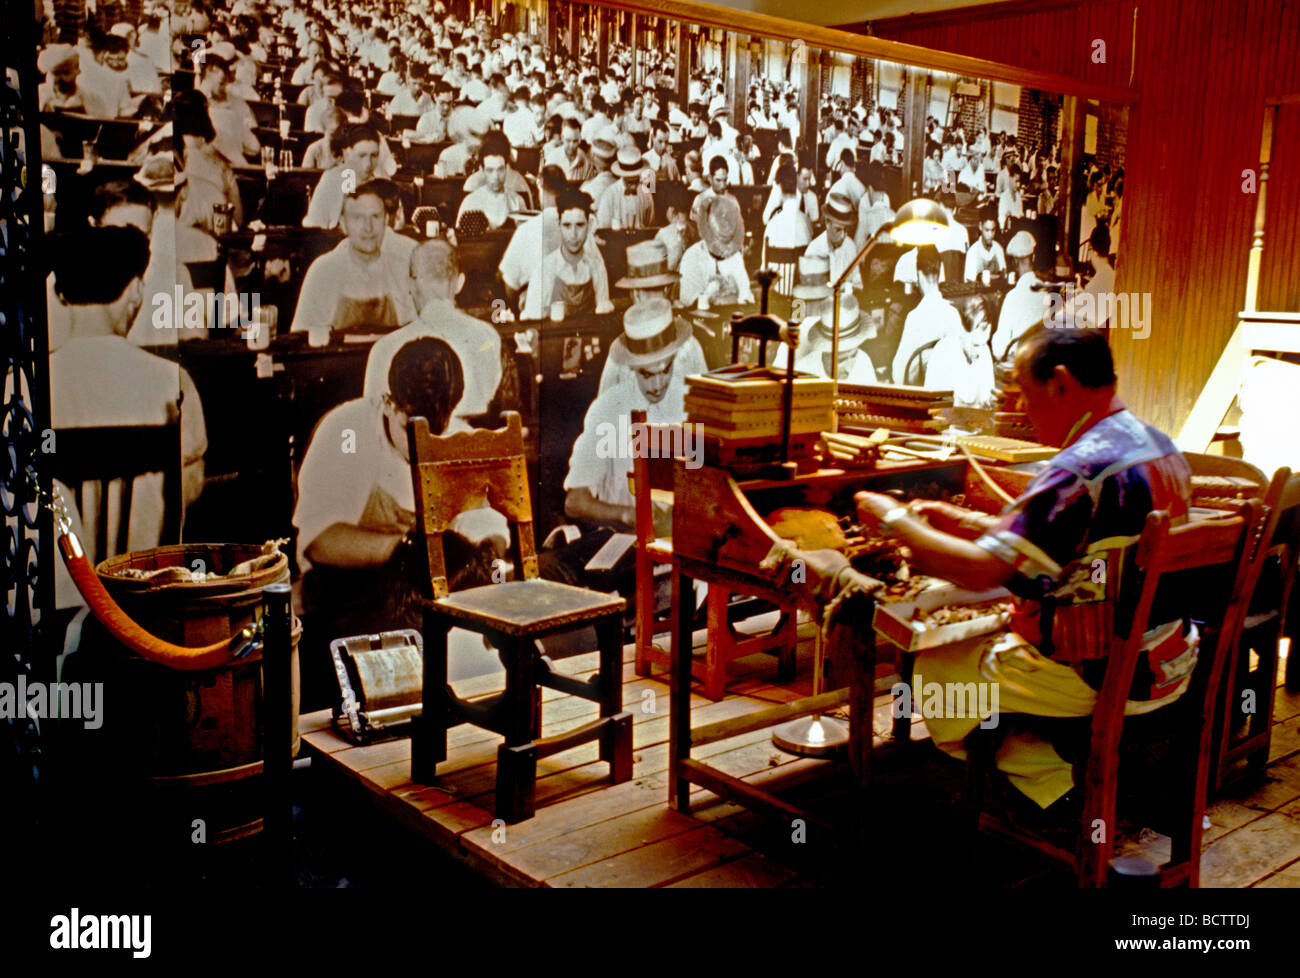 Cigar making exhibit at the Ybor City Museum State Park in Tampa Florida Stock Photo